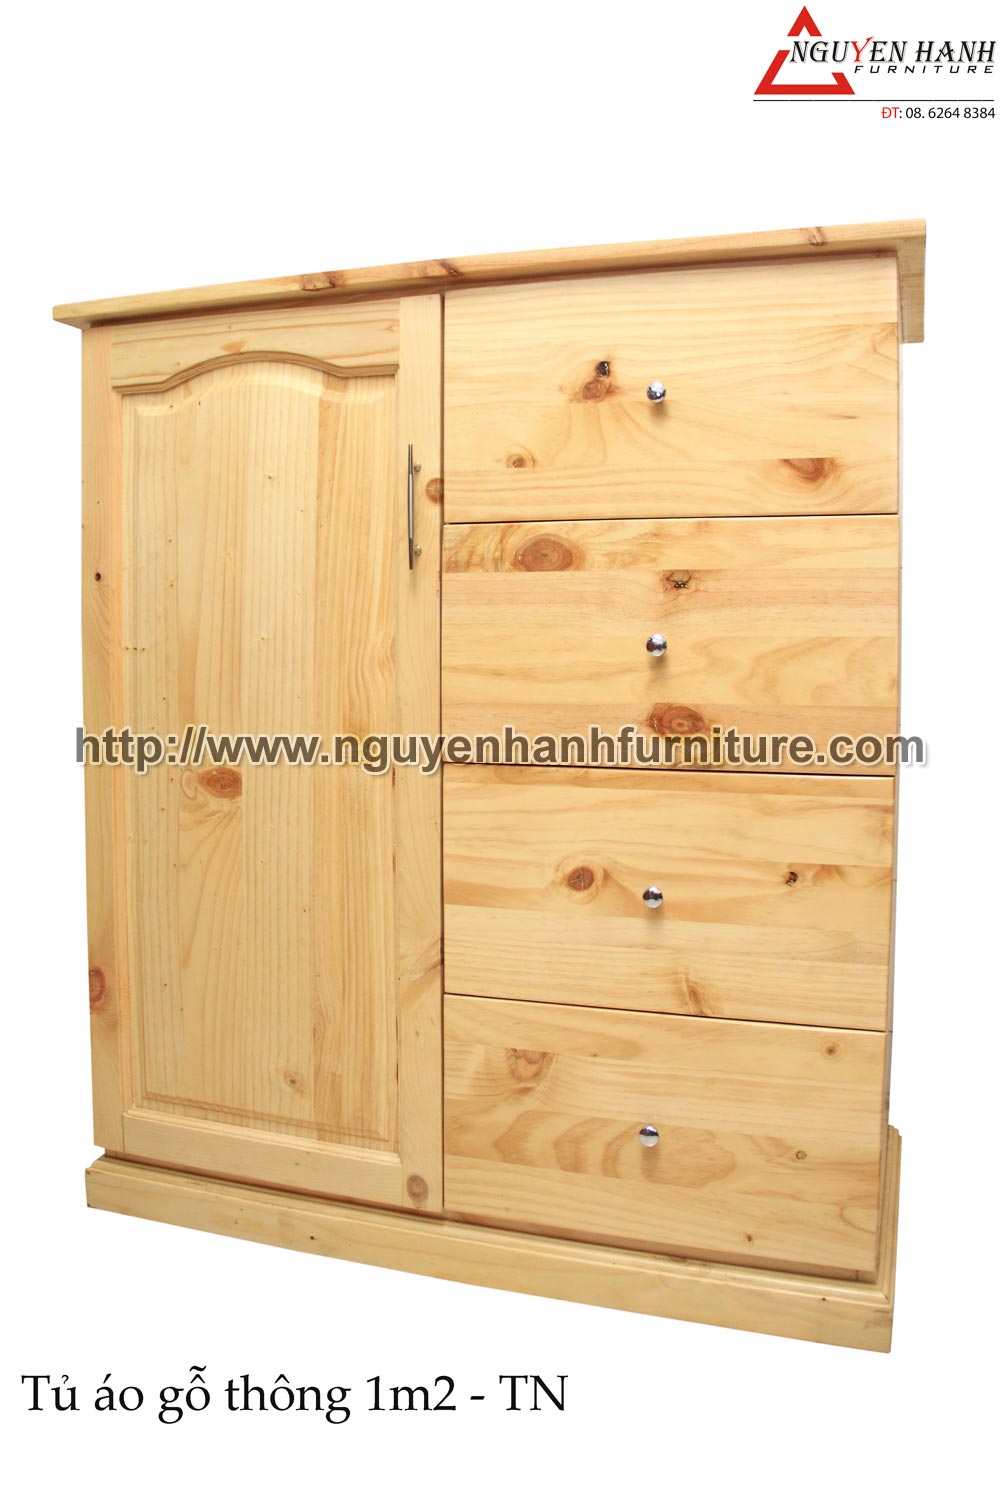 Name product: 1m2 Pine wood Wardrobe with drawers